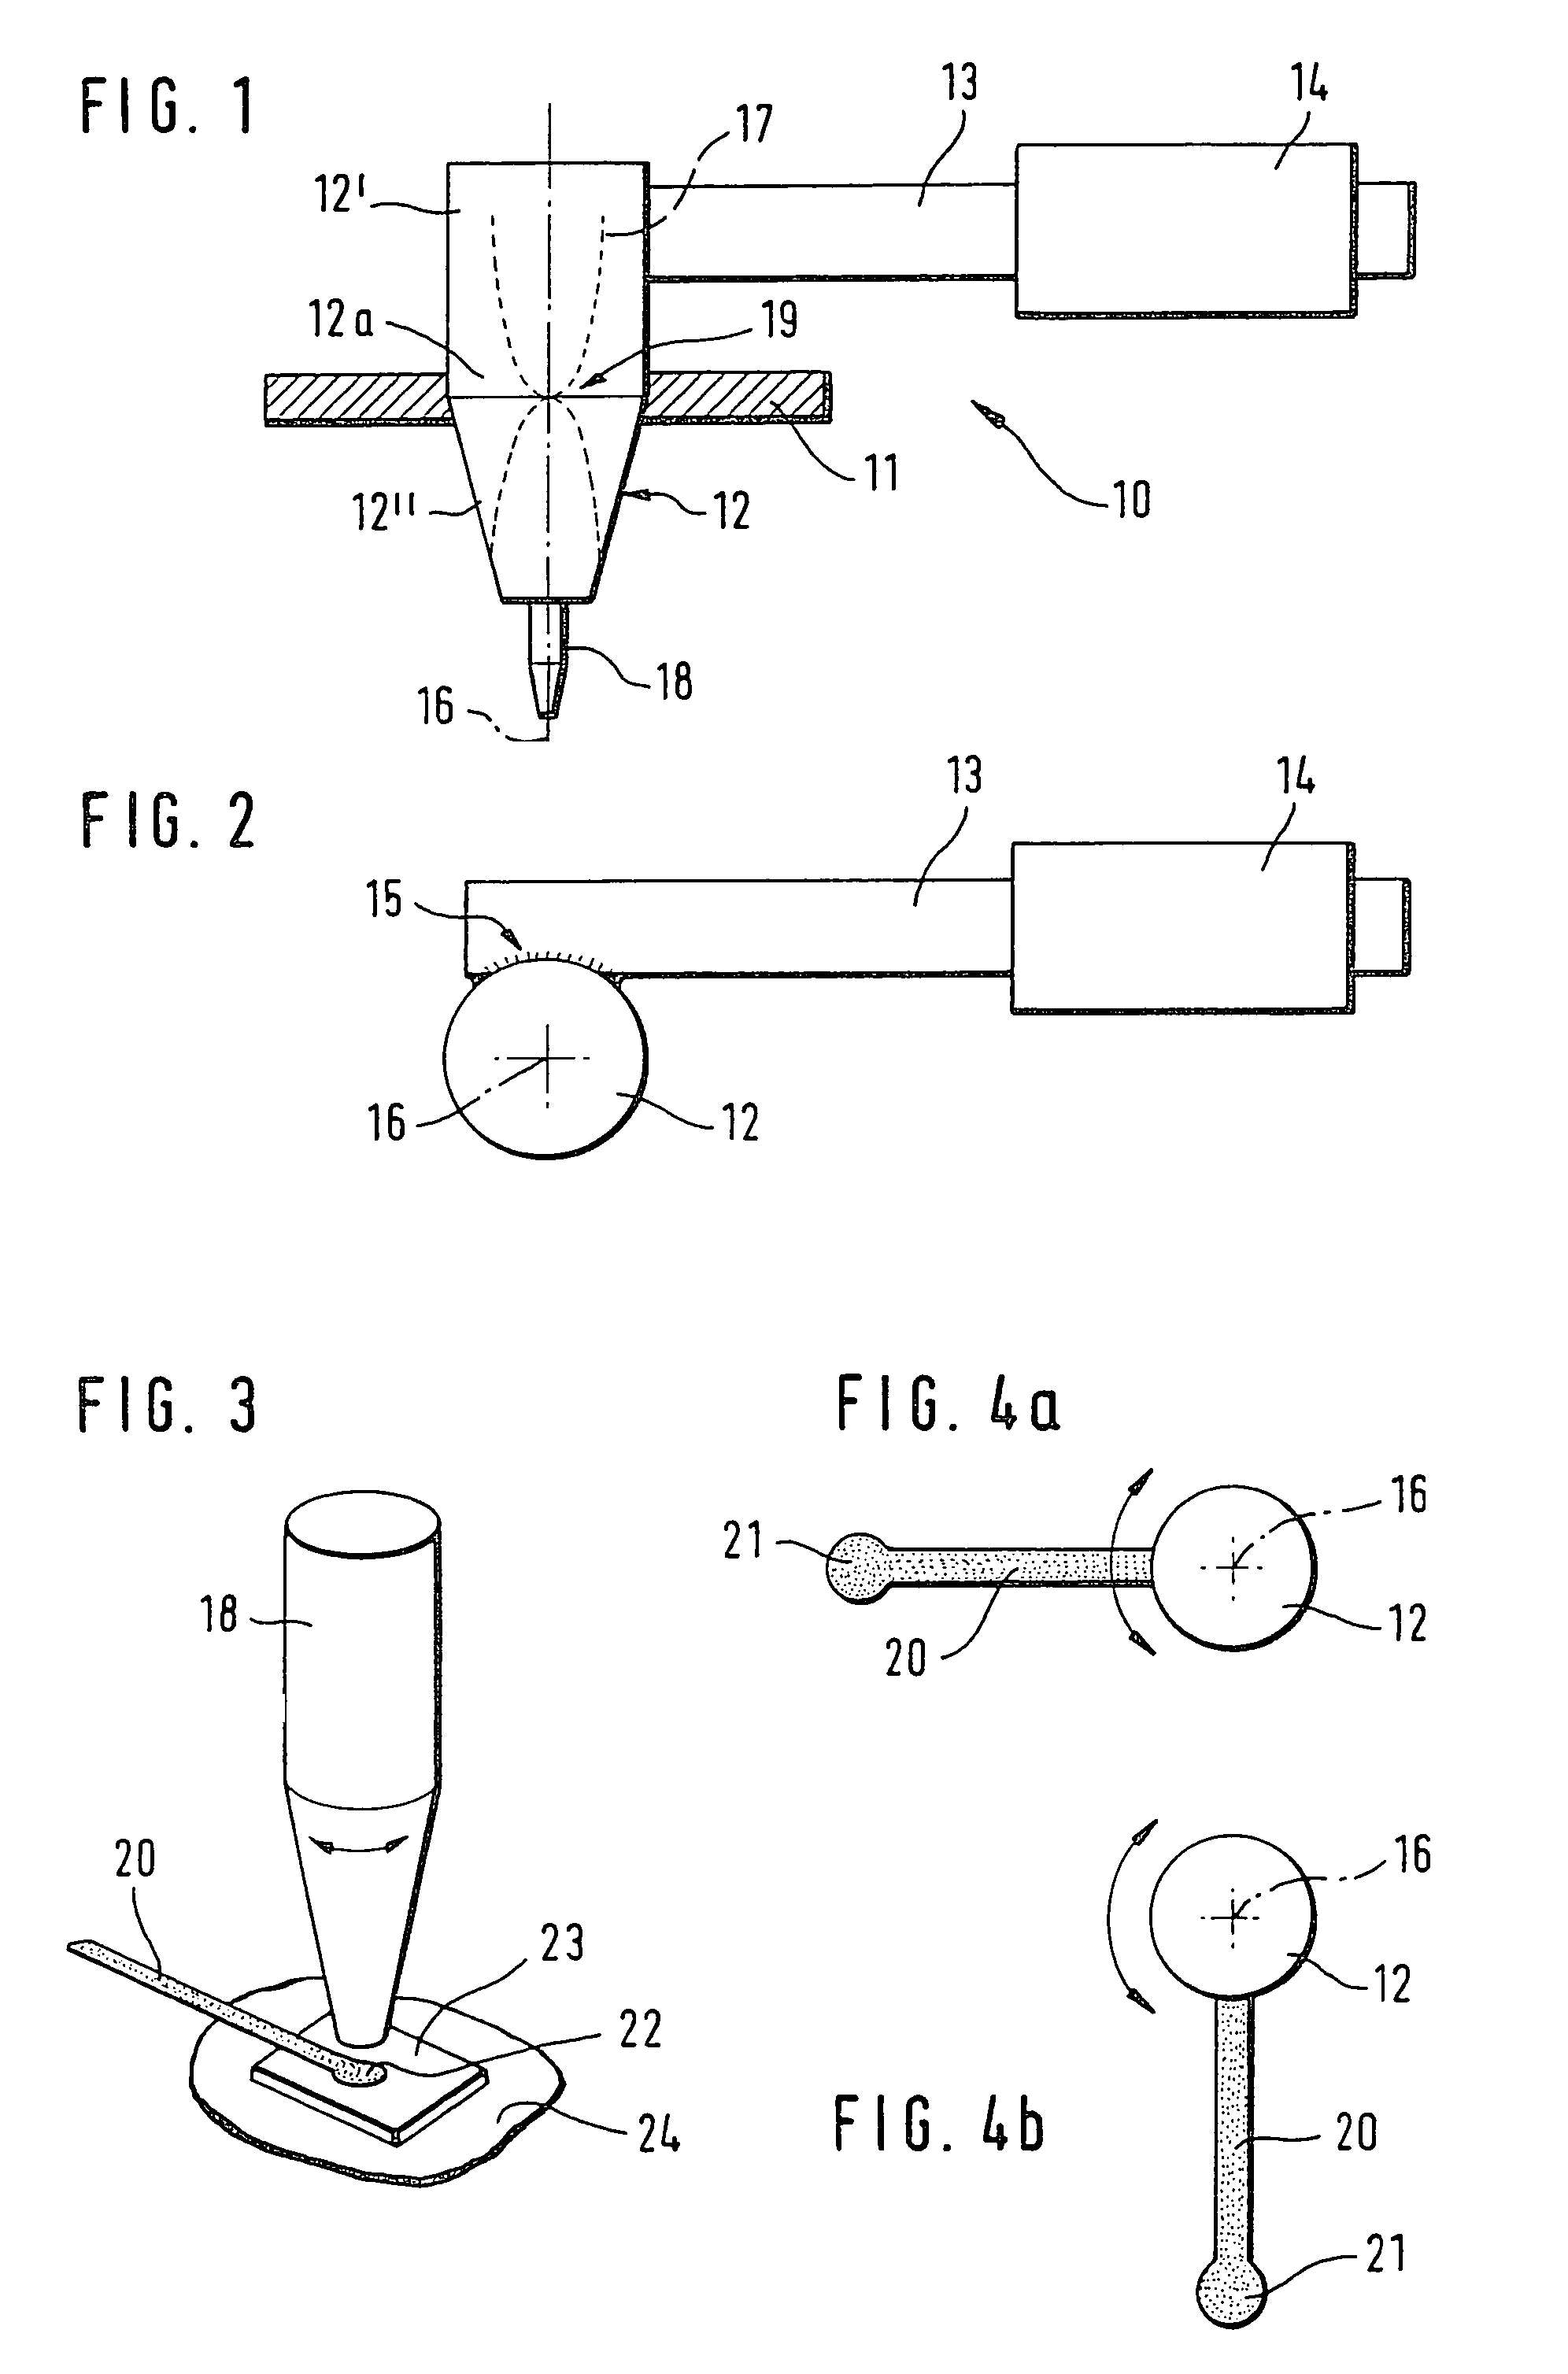 Tool head for attaching an electrical conductor on the contact surface of a substrate and method for implementing the attachment